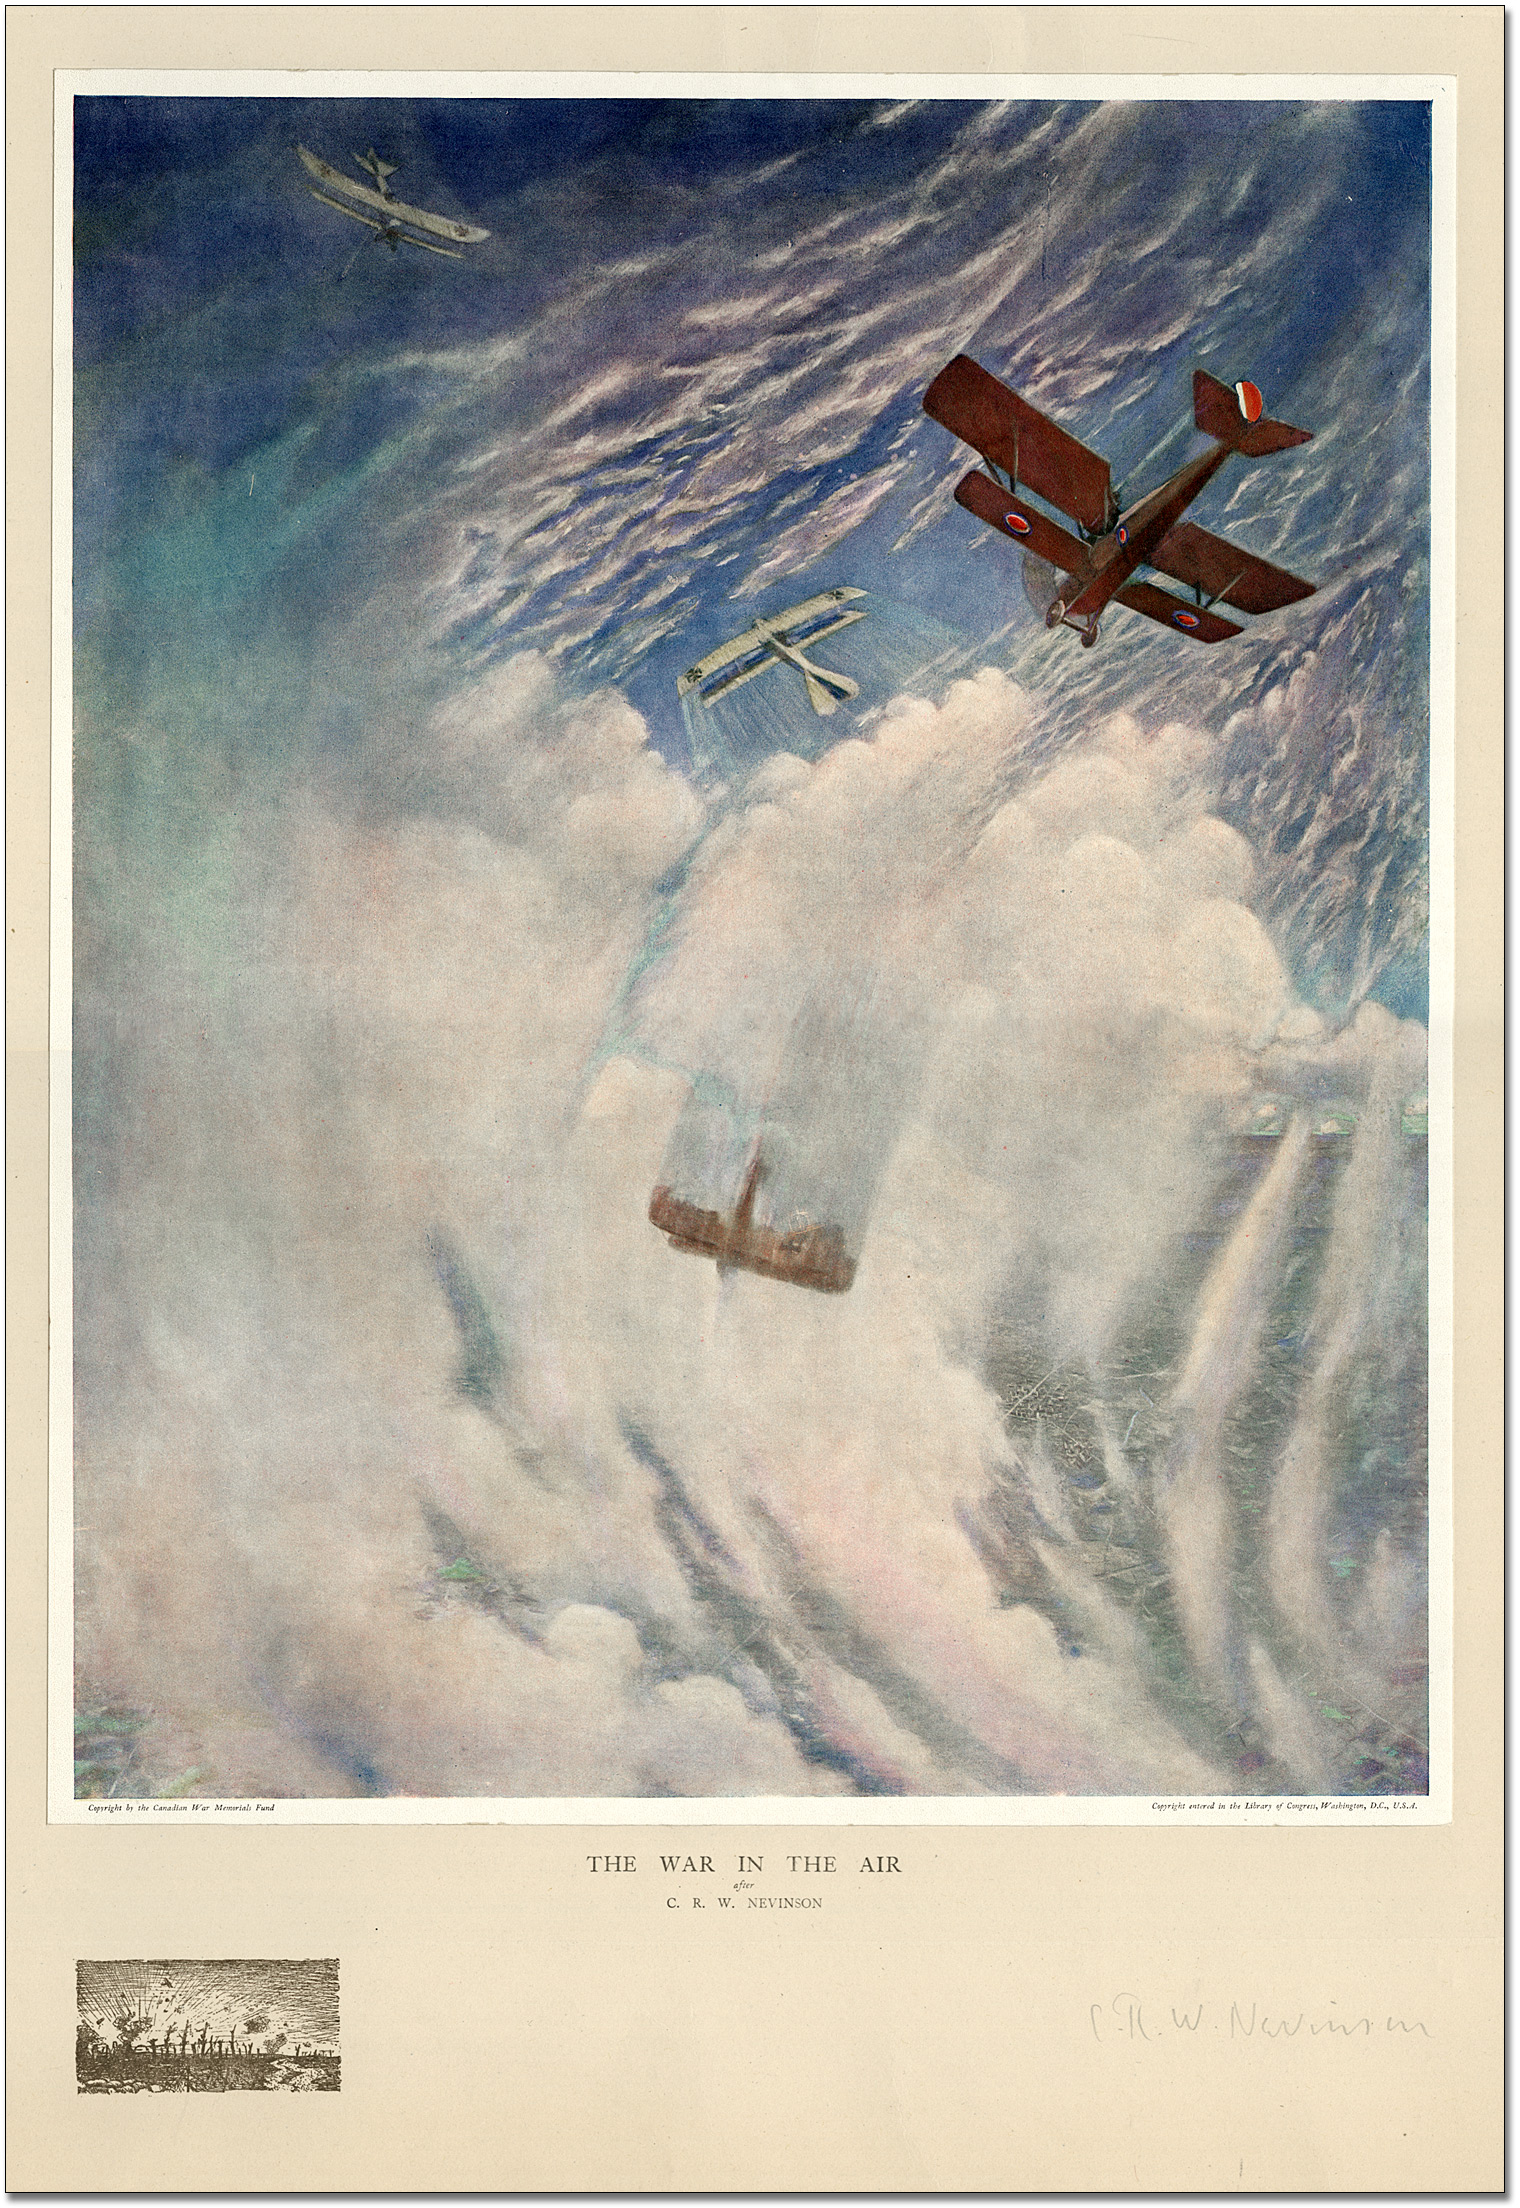 The War in the Air, 1917